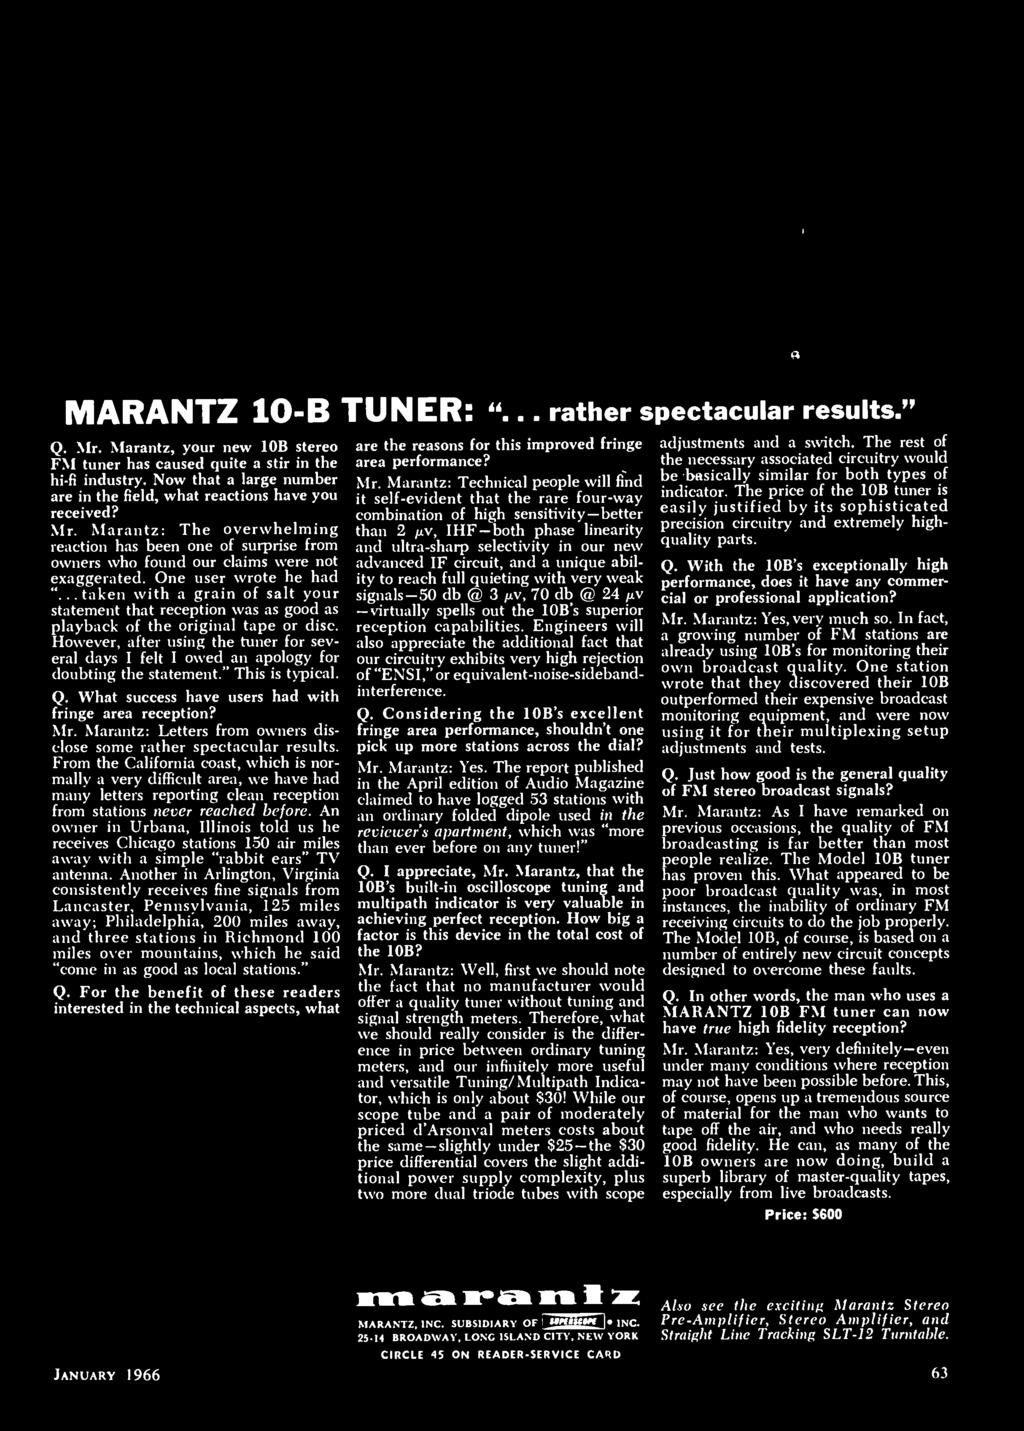 Marantz: Letters from owners disclose some rather spectacular results.